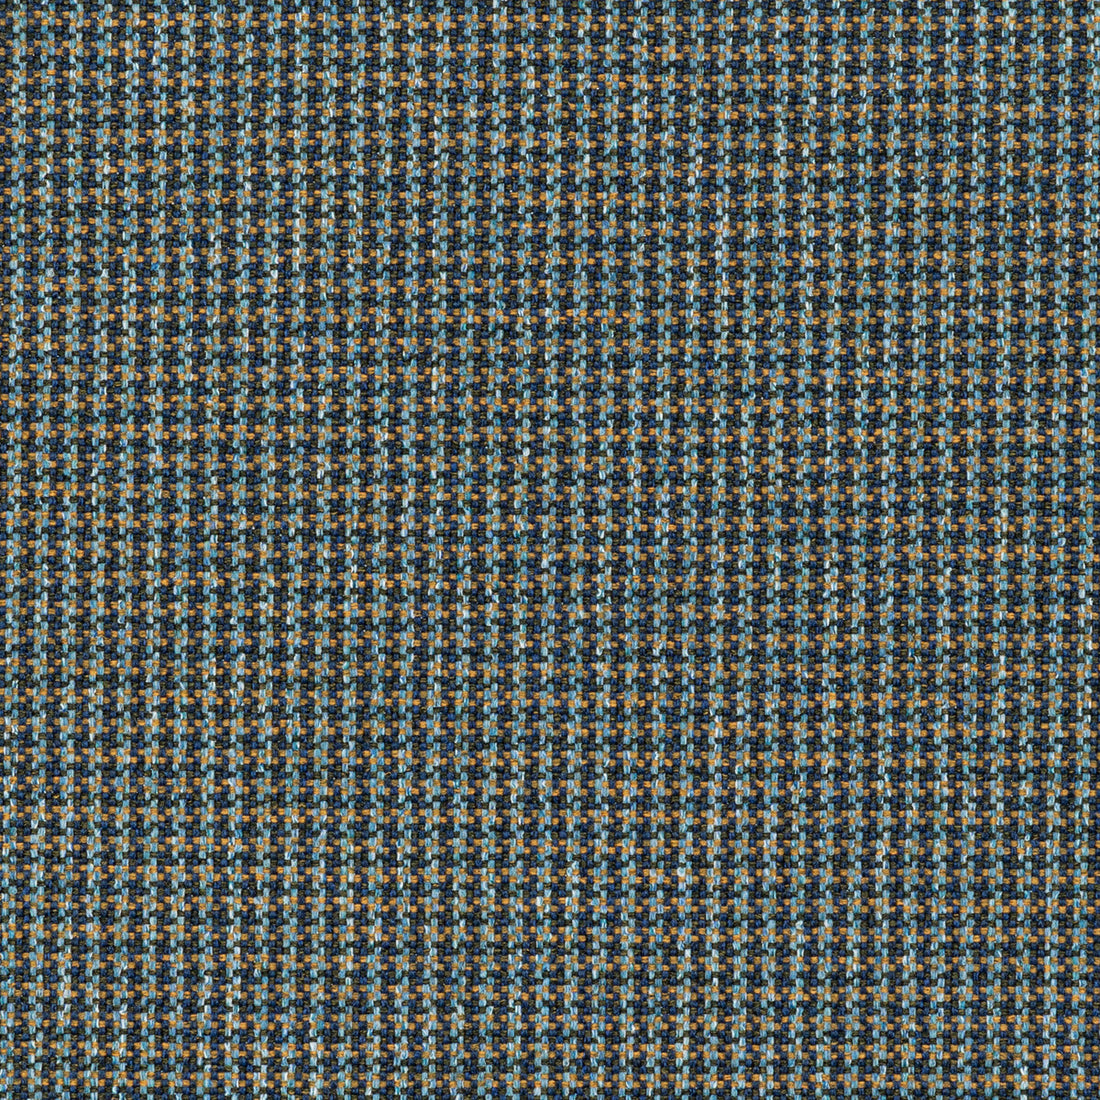 Steamboat fabric in jazz color - pattern 36258.5.0 - by Kravet Contract in the Supreen collection